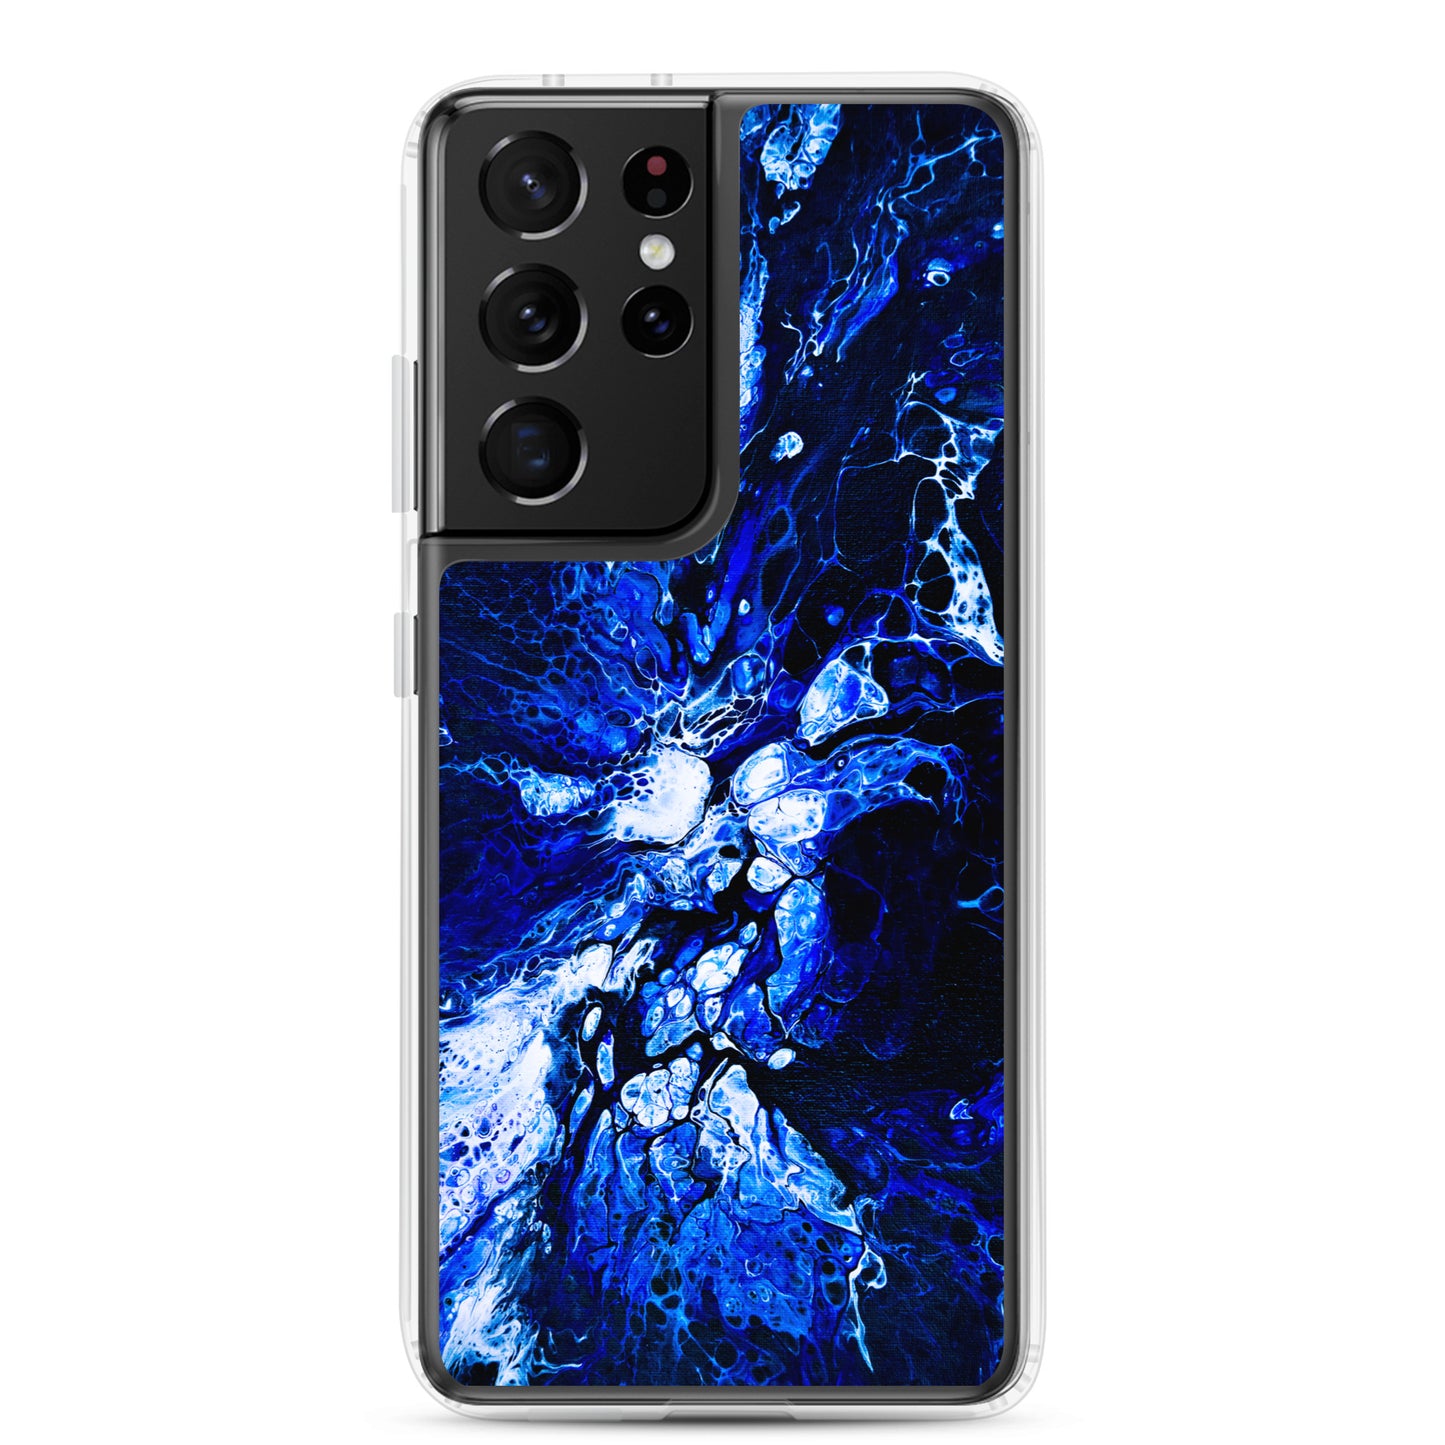 NightOwl Studio Custom Phone Case Compatible with Samsung Galaxy, Slim Cover for Wireless Charging, Drop and Scratch Resistant, Blue Burst